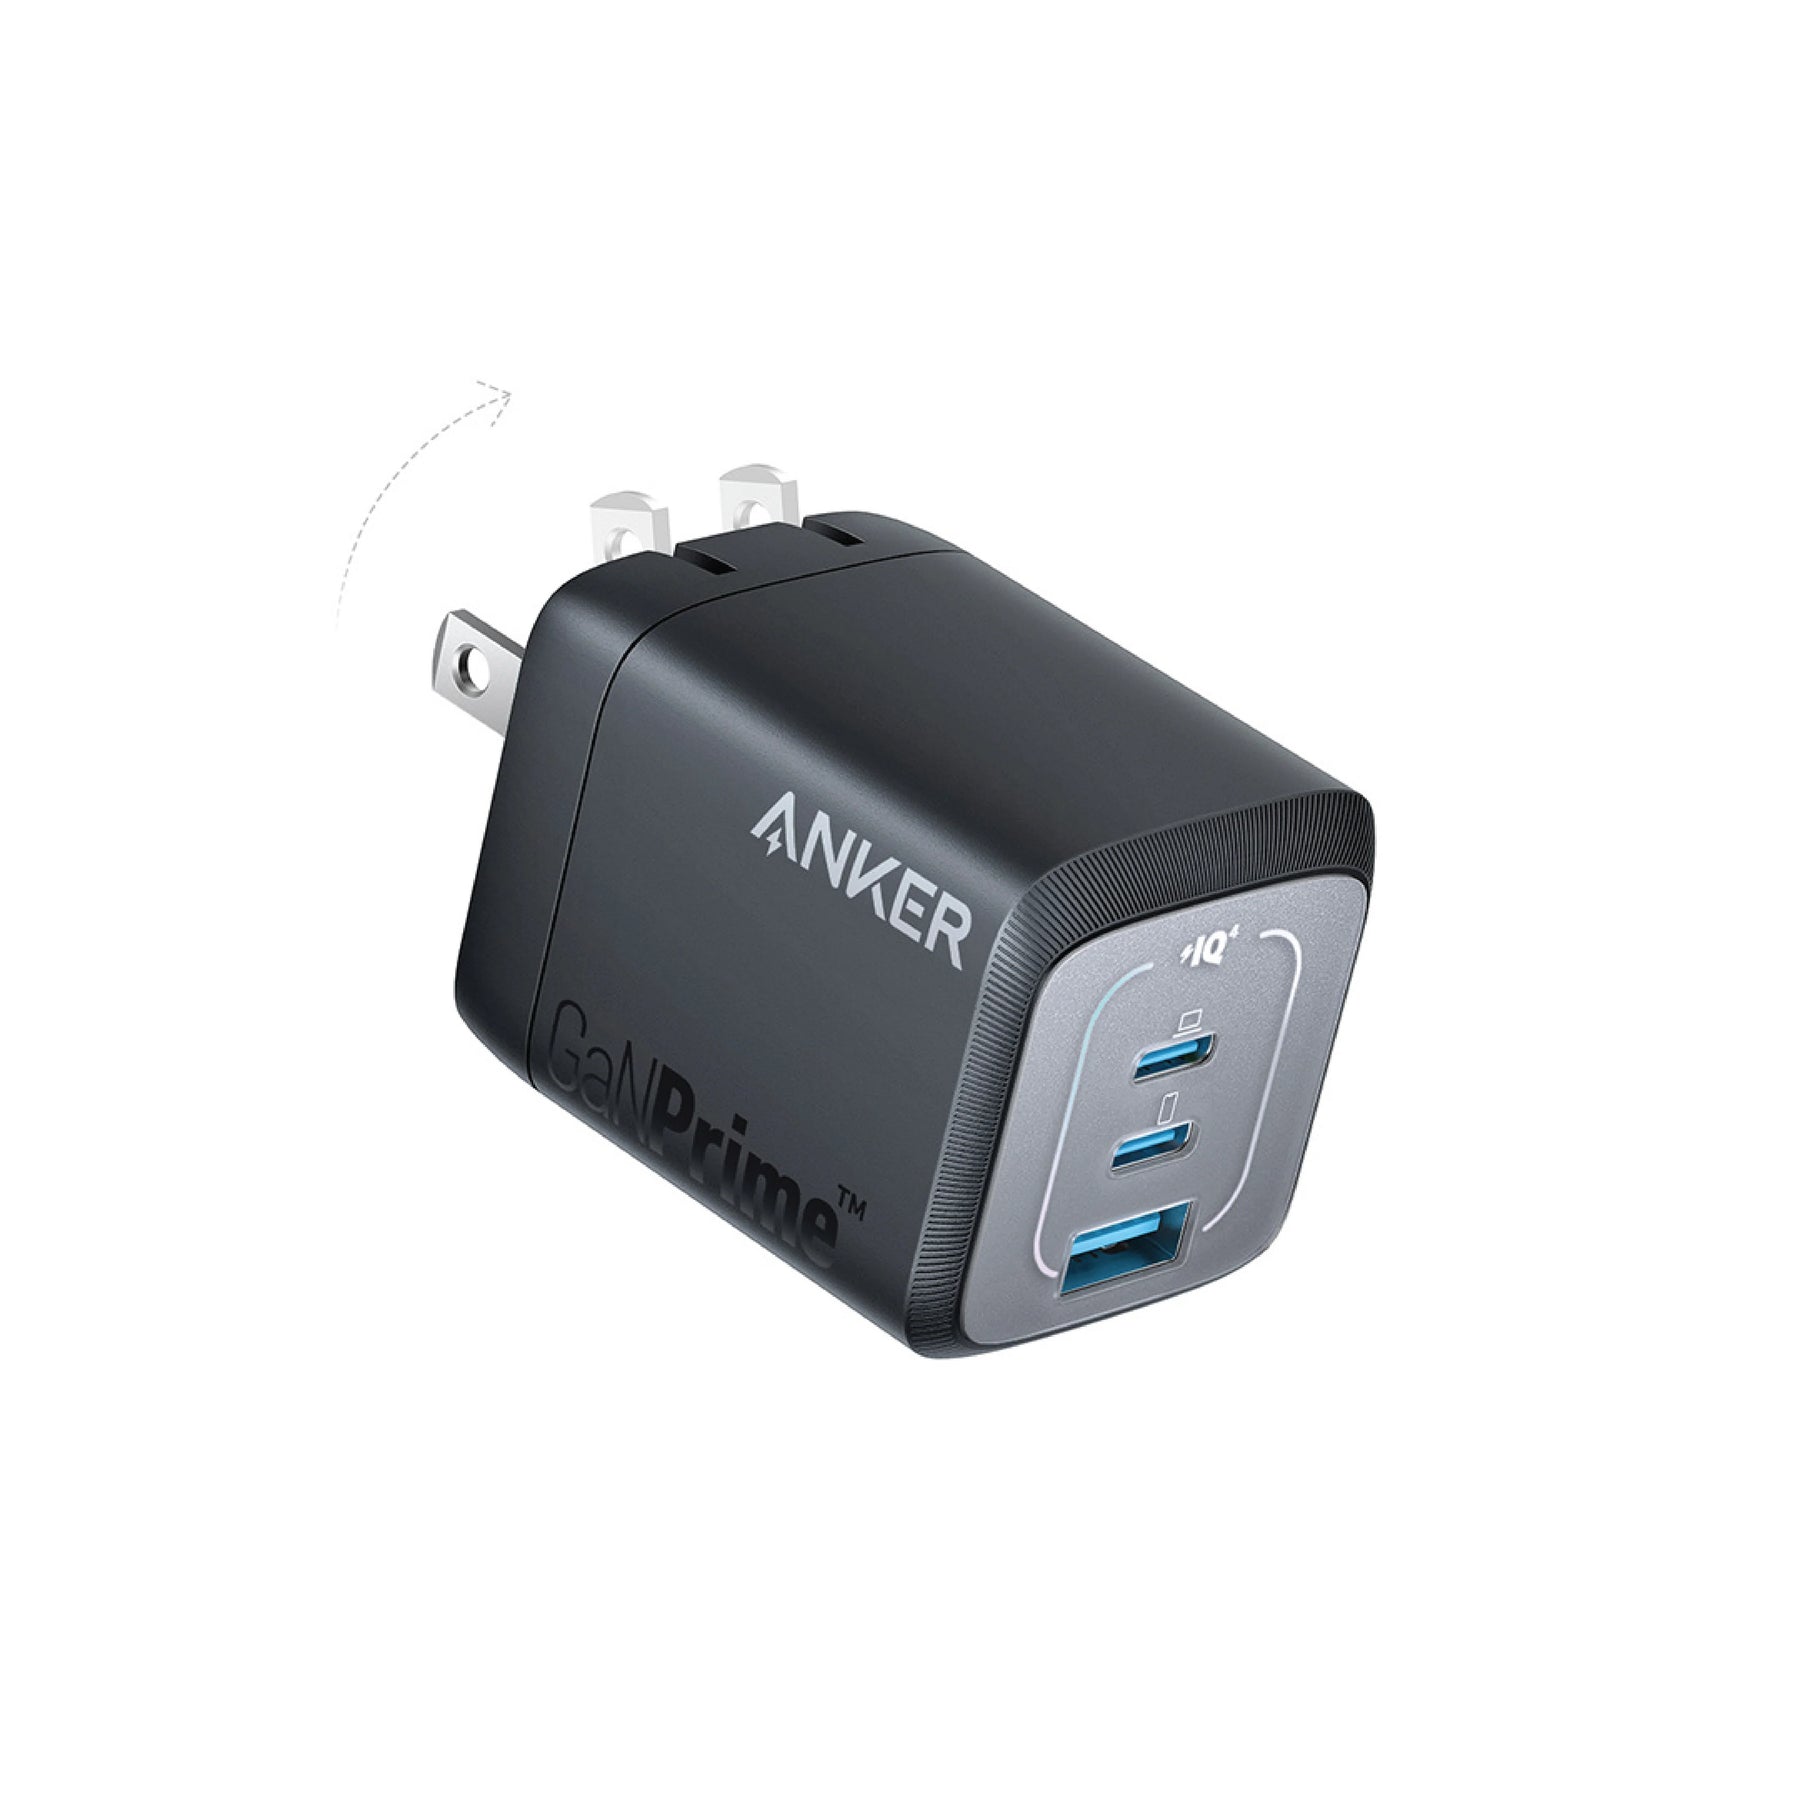 Anker Prime GaN 67W Wall Charger: Charge 3 Devices at Once